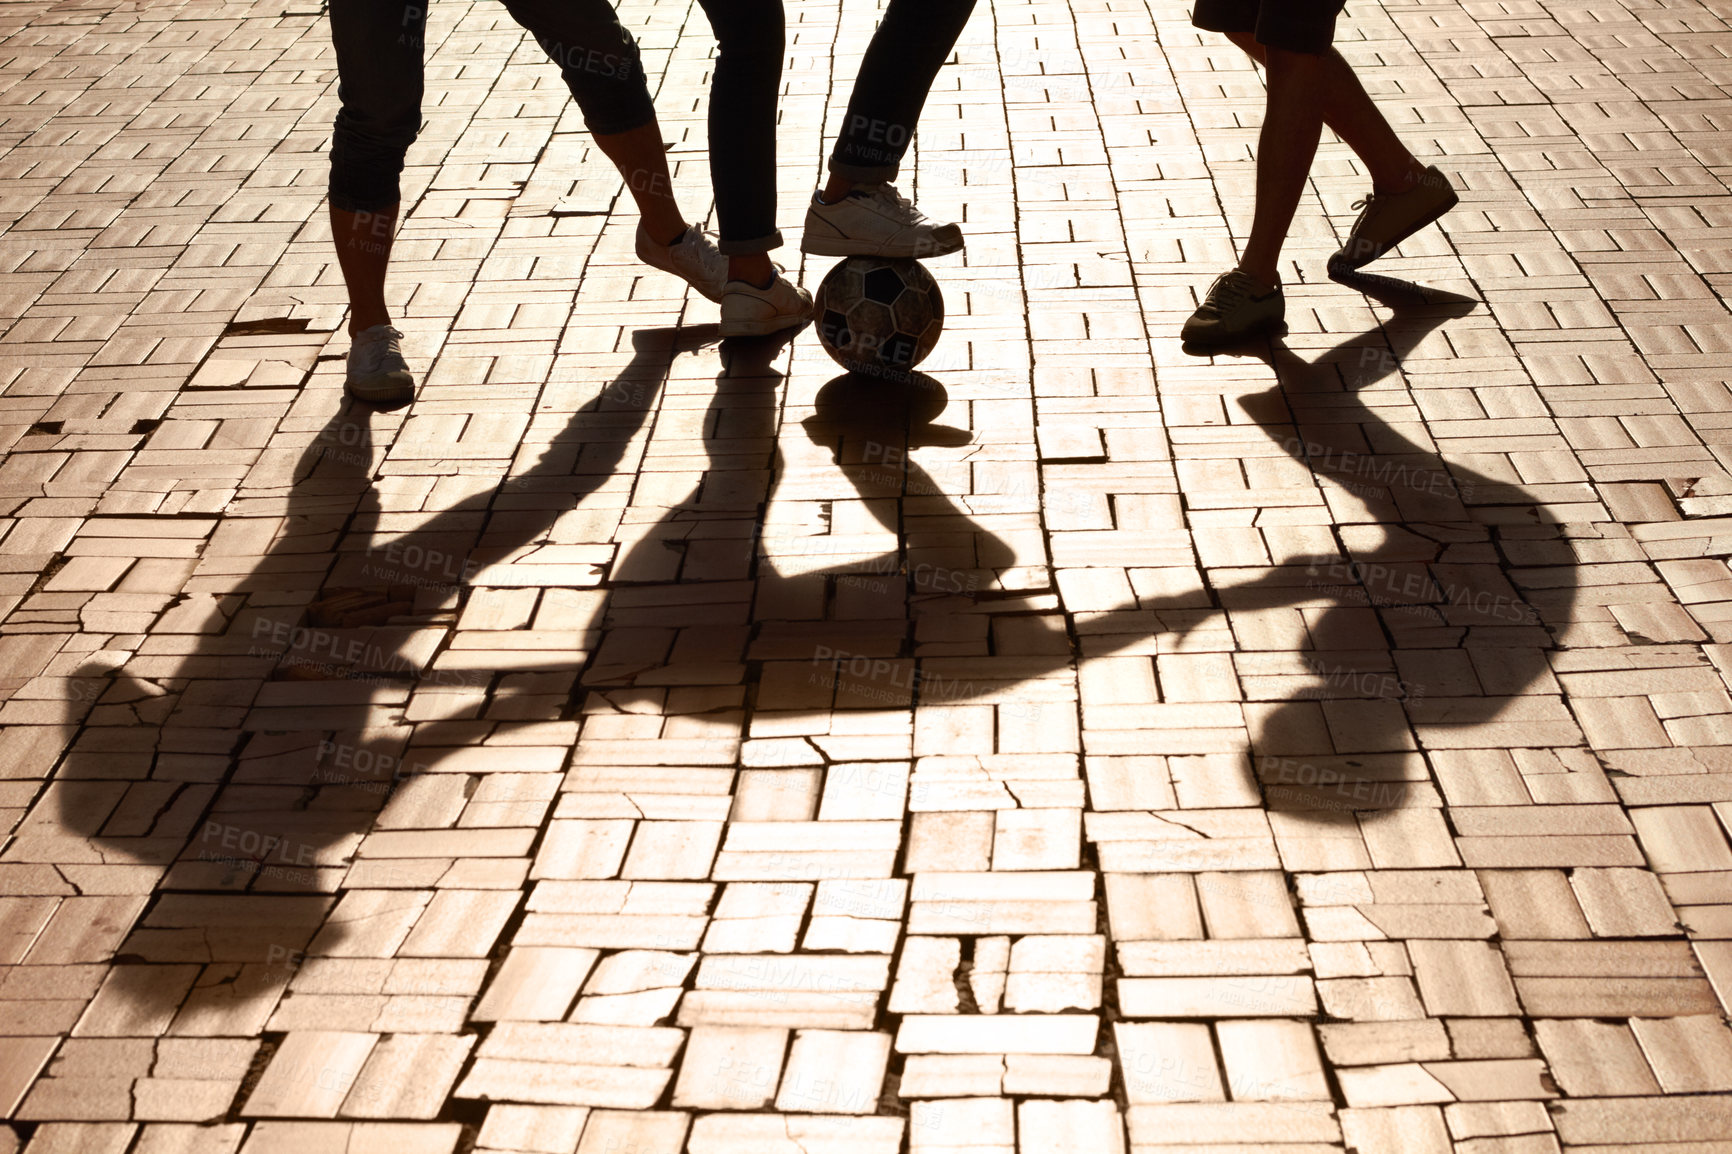 Buy stock photo Cropped image of legs kicking a ball with shadows on the paved road